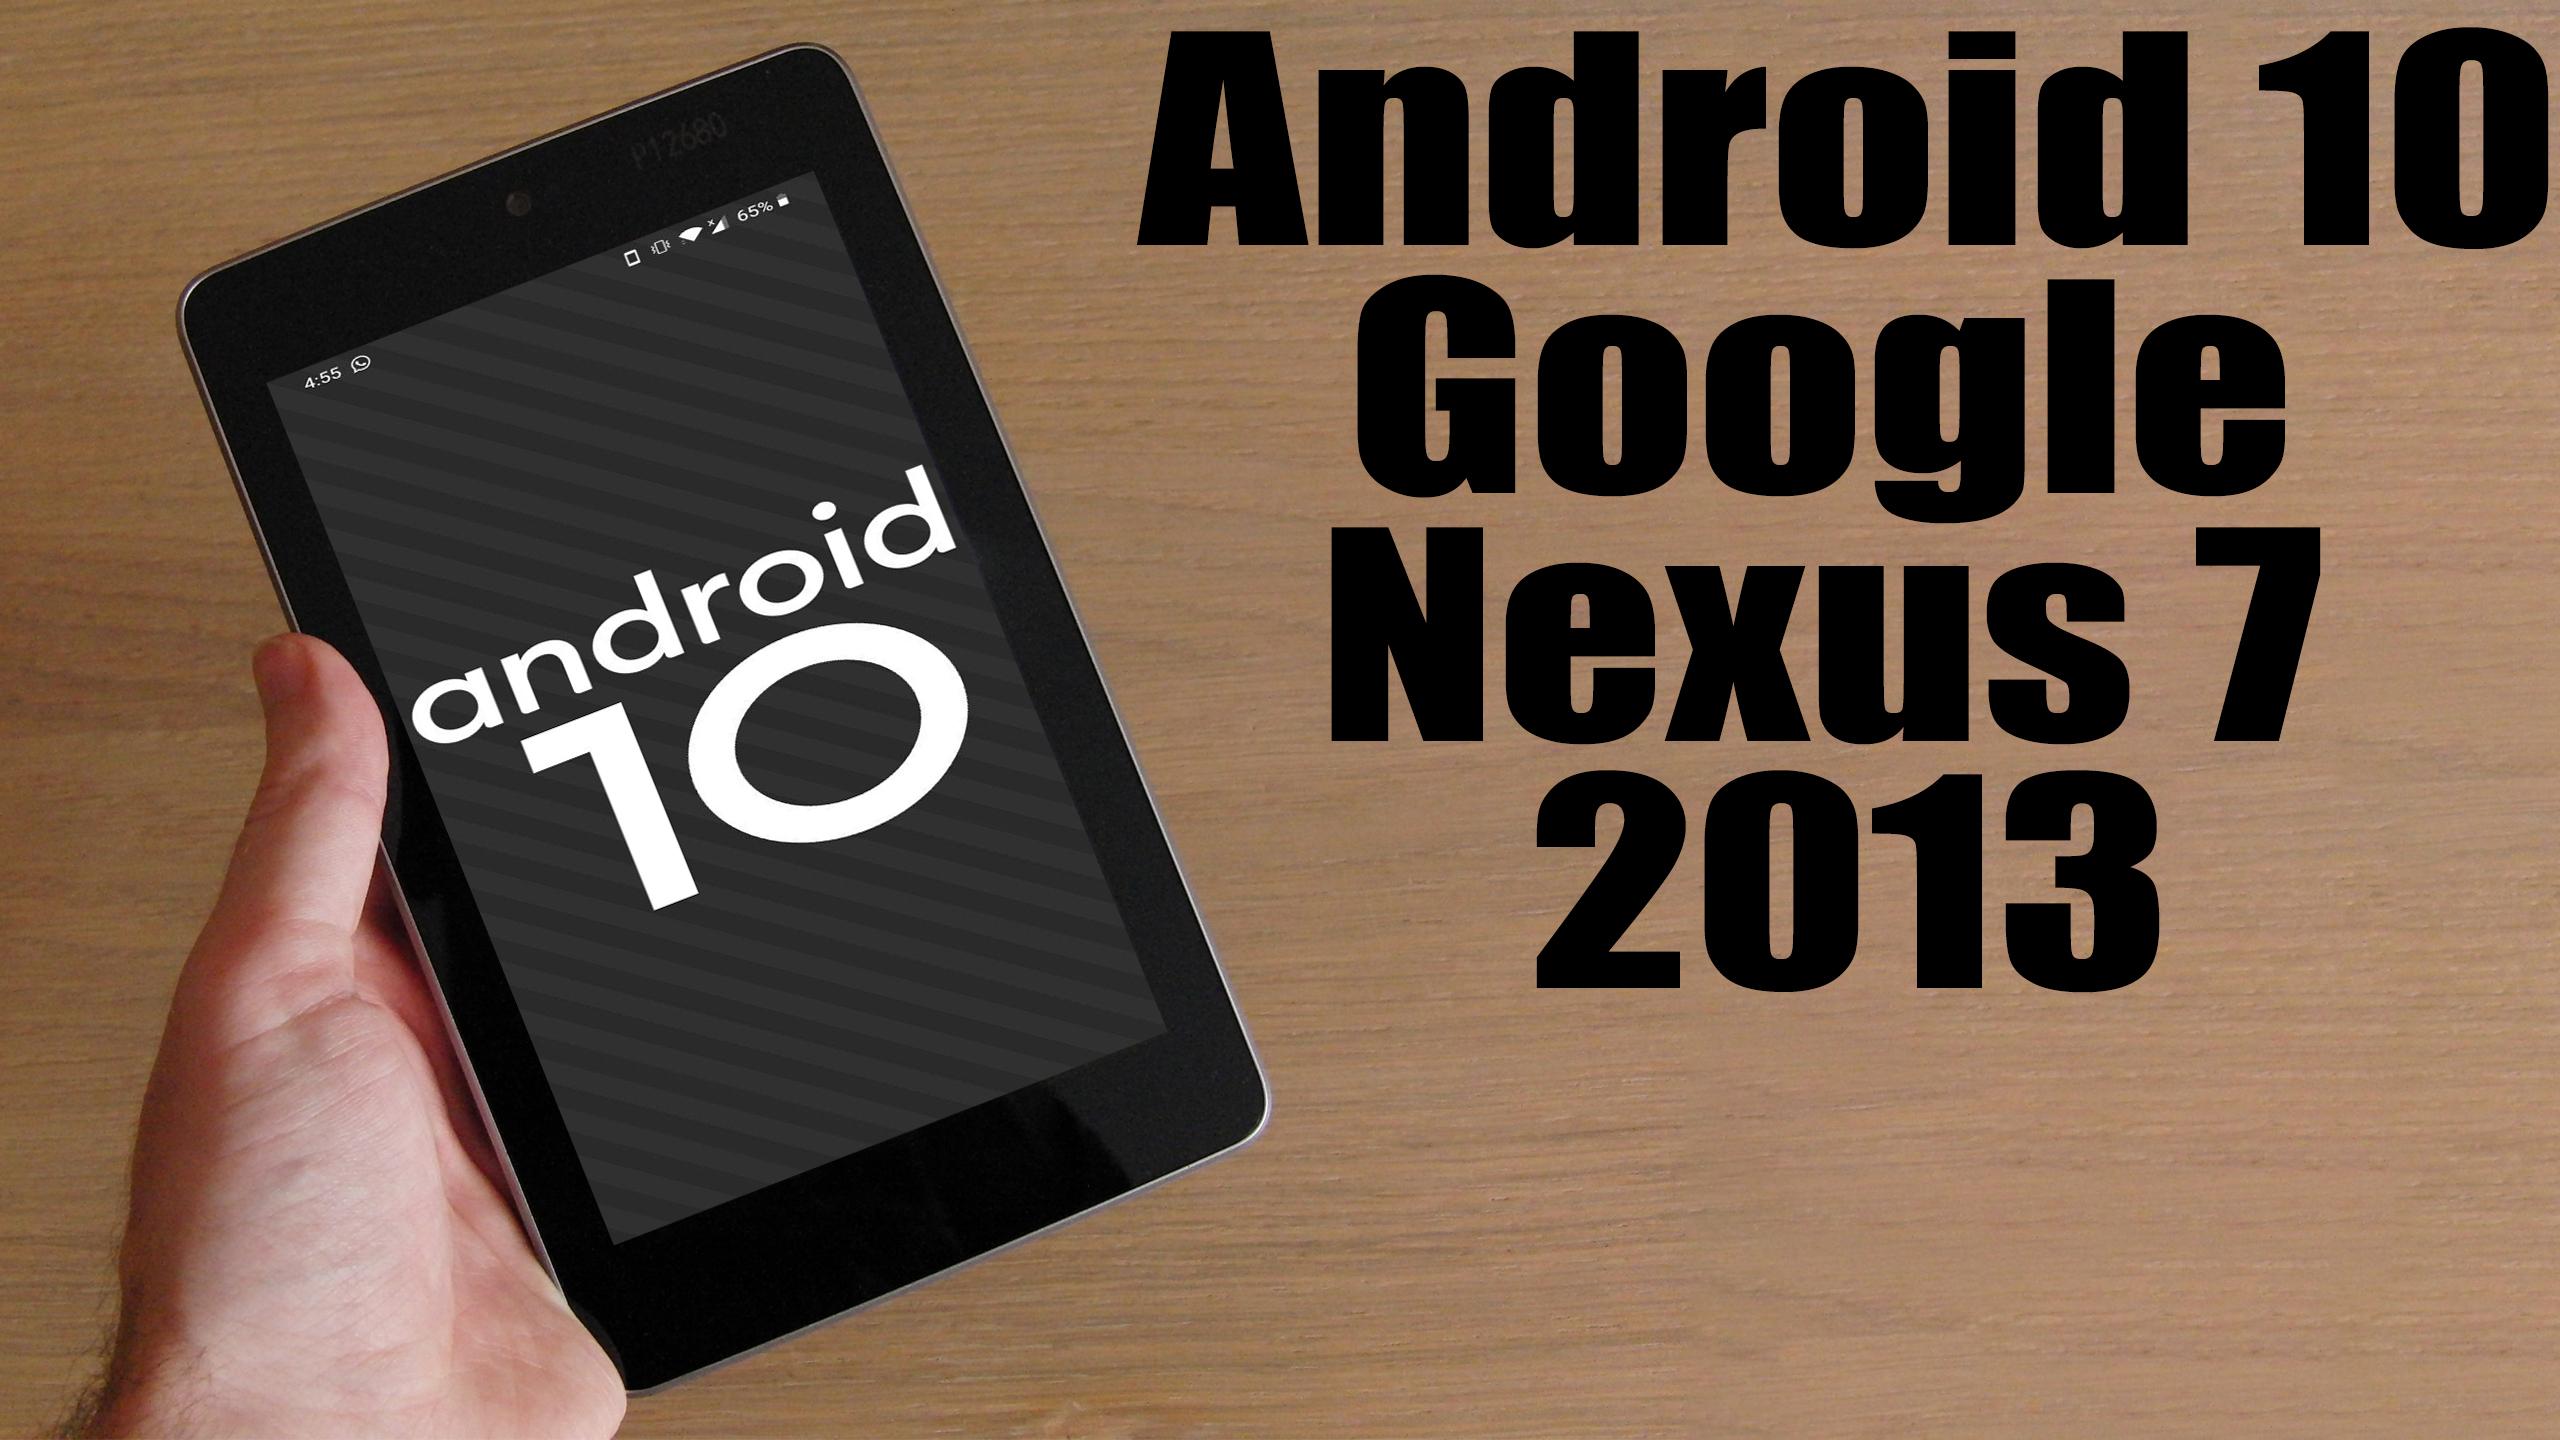 Install Android 10 Nexus 7 13 Resurrection Remix How To Guide The Upgrade Guide